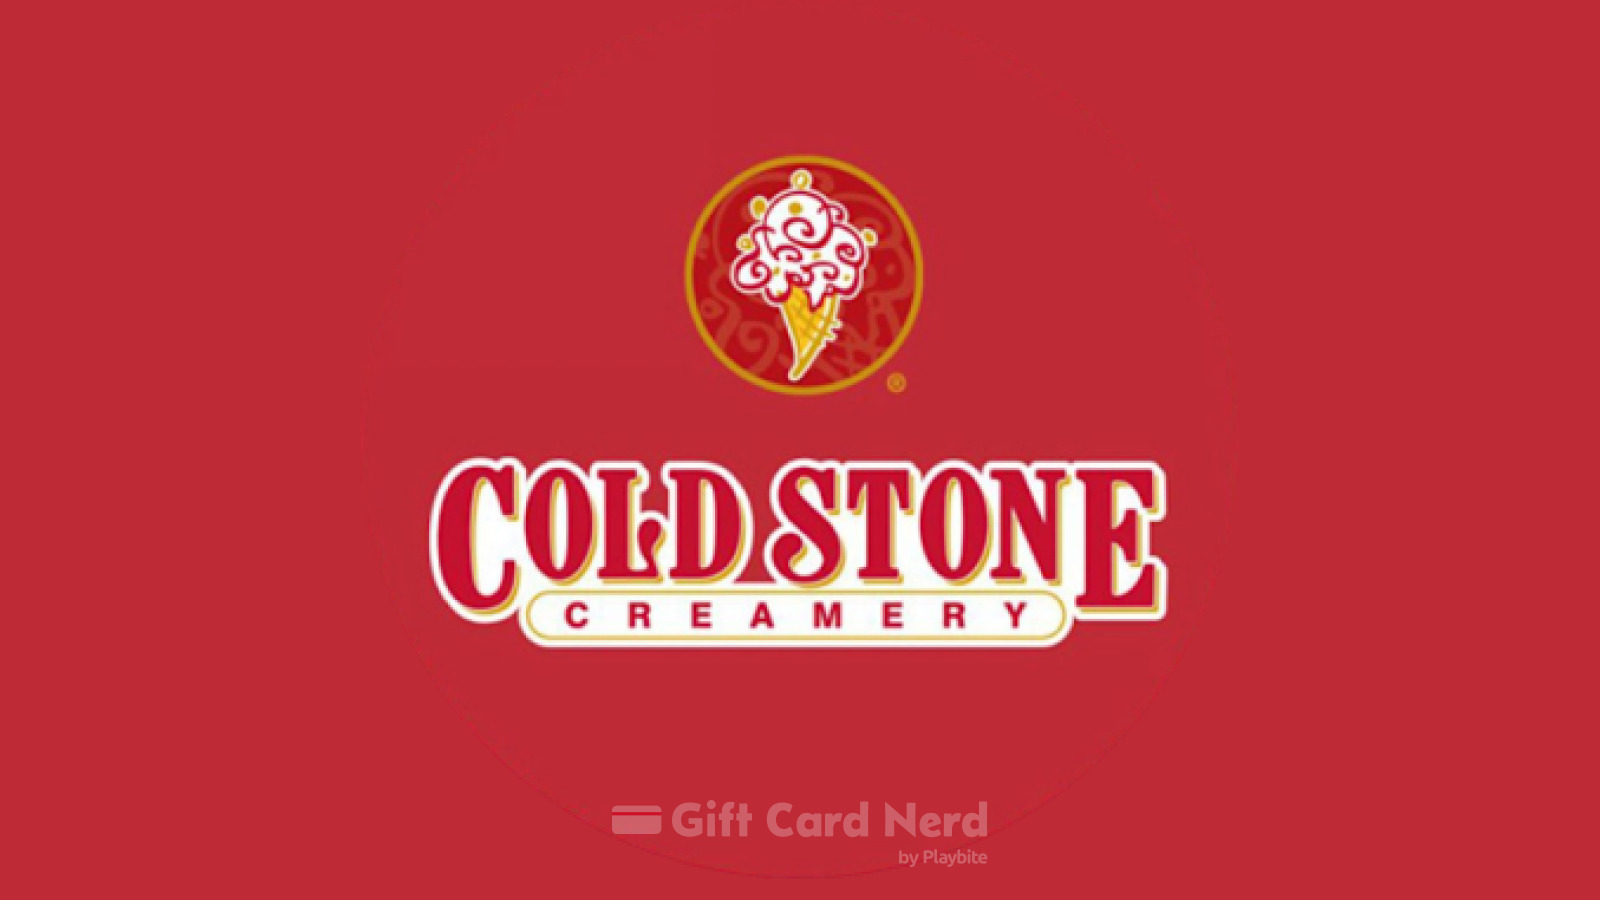 Can I Find Cold Stone Creamery Gift Cards at GameStop?